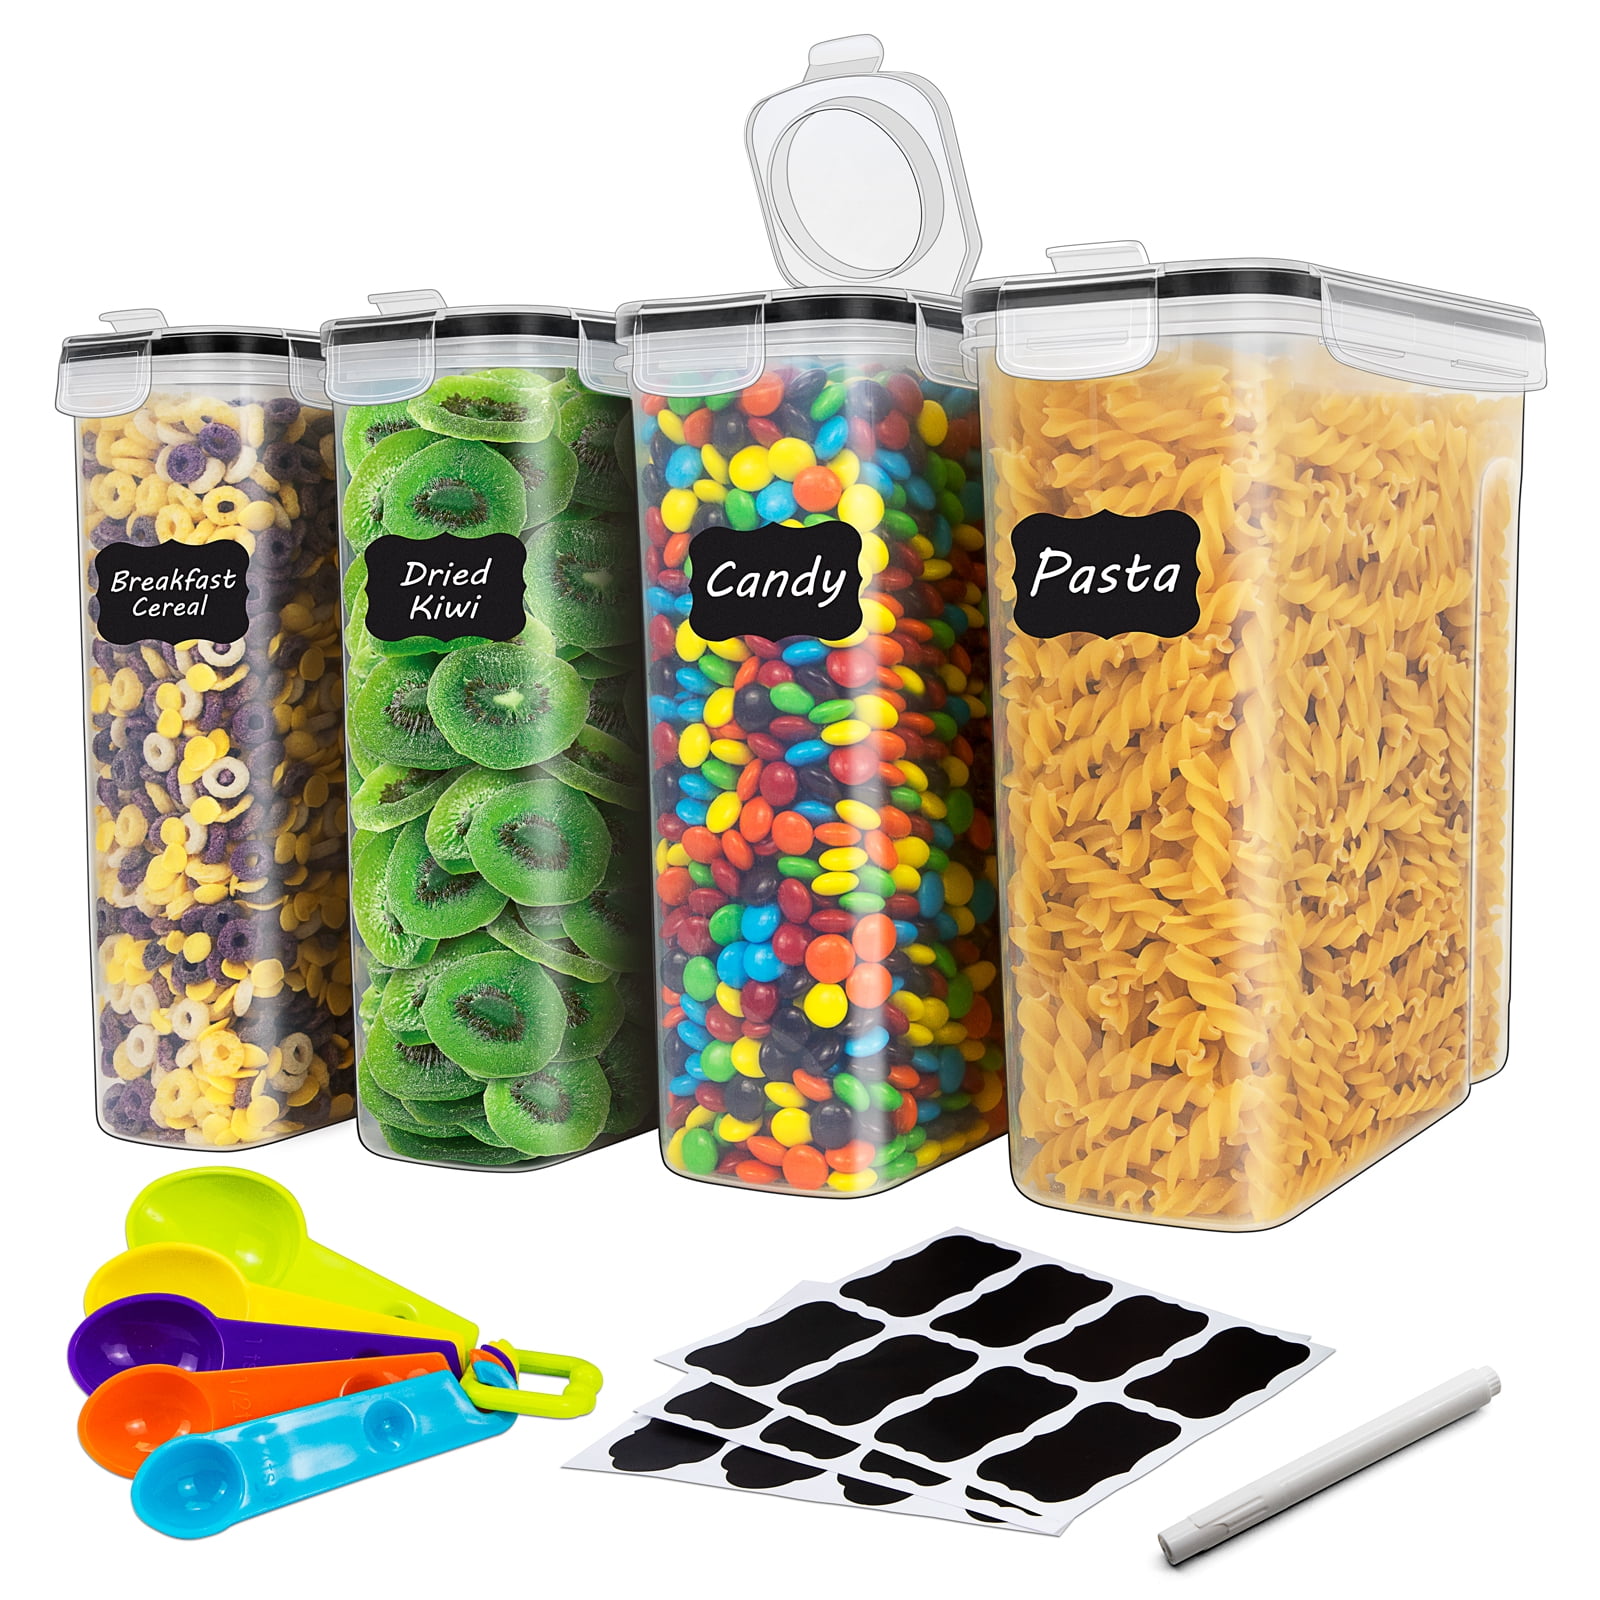 Rubbermaid® Cereal Keeper Storage Container, 1.5 gal - King Soopers